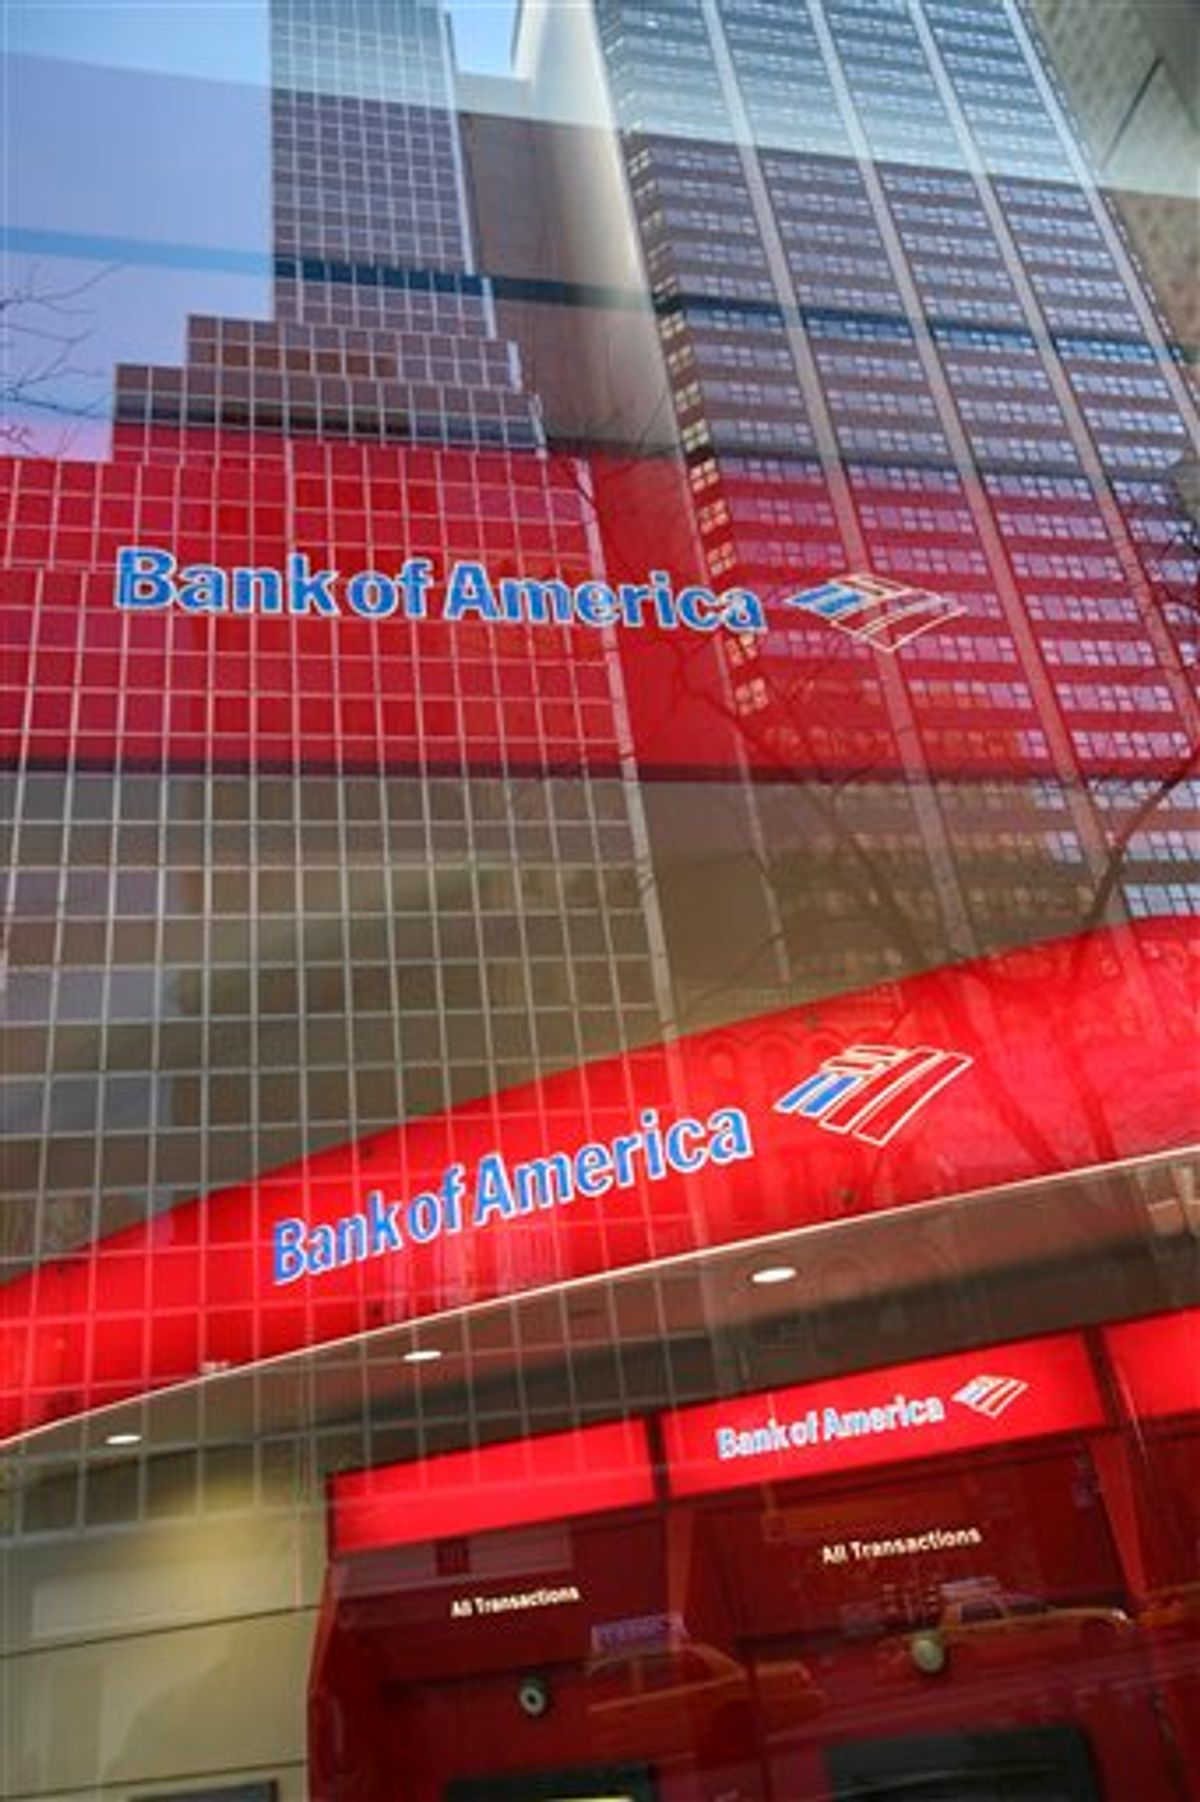 FILE - In this Jan. 25, 2009 file photo, a Bank of America branch office is shown in New York. Bank of America, Citi, Wells Fargo Bank, JPMorgan Chase and other  banks got together in 1997 and formed a private company called Mortgage Electronic Registry Systems Inc., or MERS. Its motto: "Process loans, not paperwork."(AP Photo/Mark Lennihan, file)  (AP)